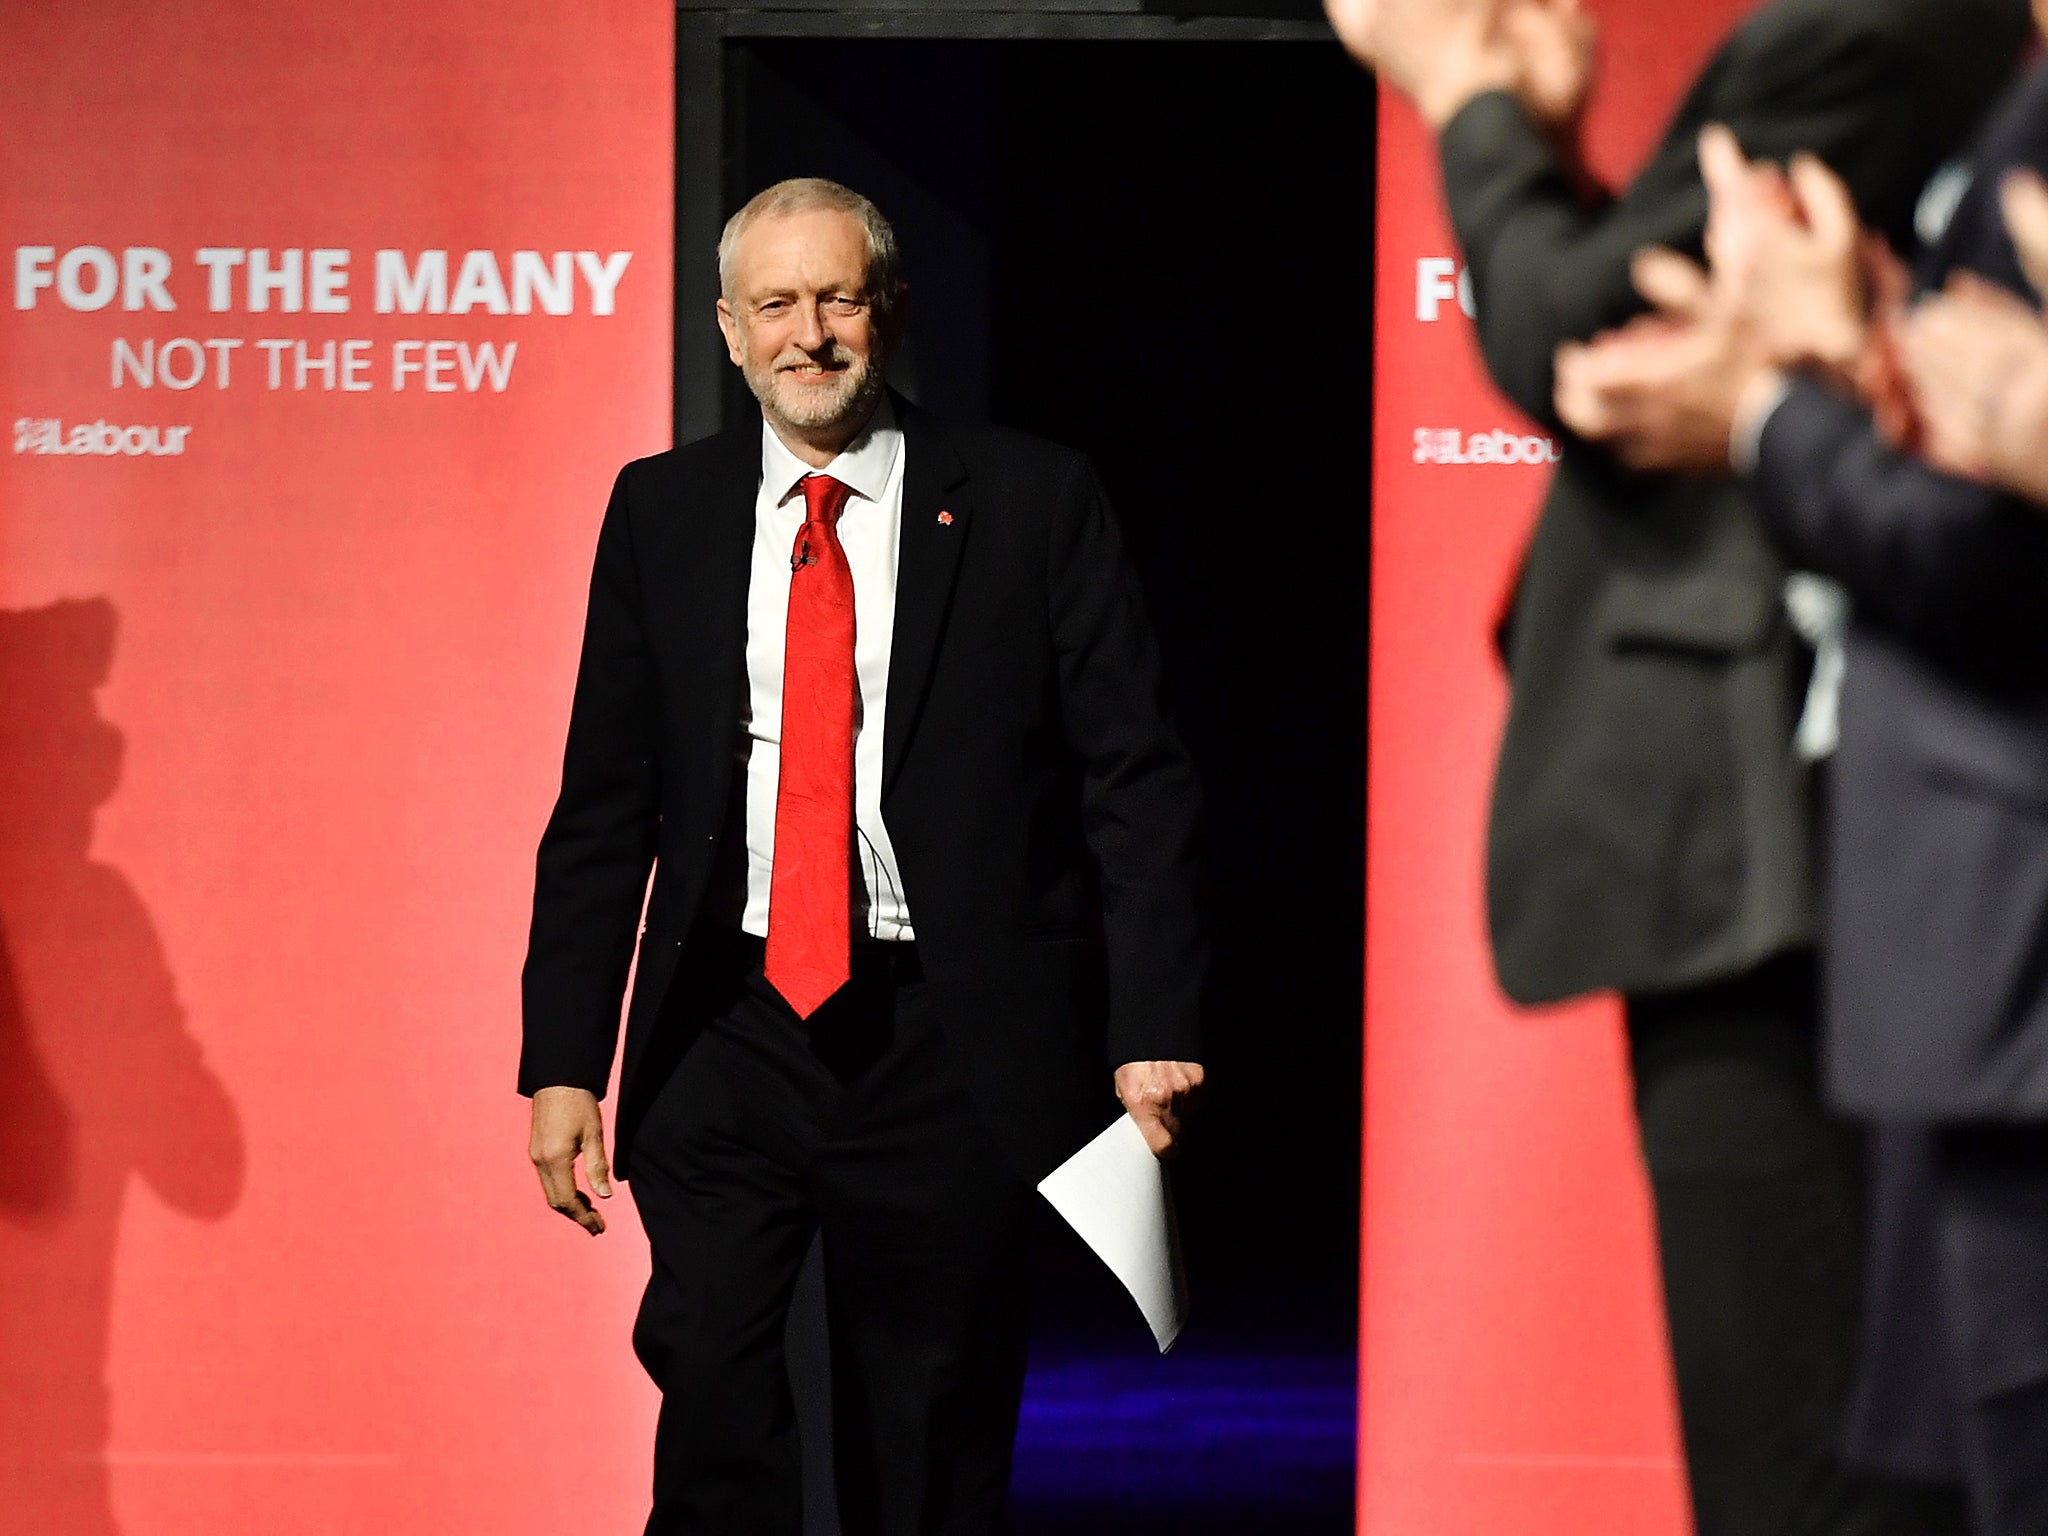 Labour Party leader Jeremy Corbyn arrives to speak at the Labour Party general election campaign launch at Event City in Manchester